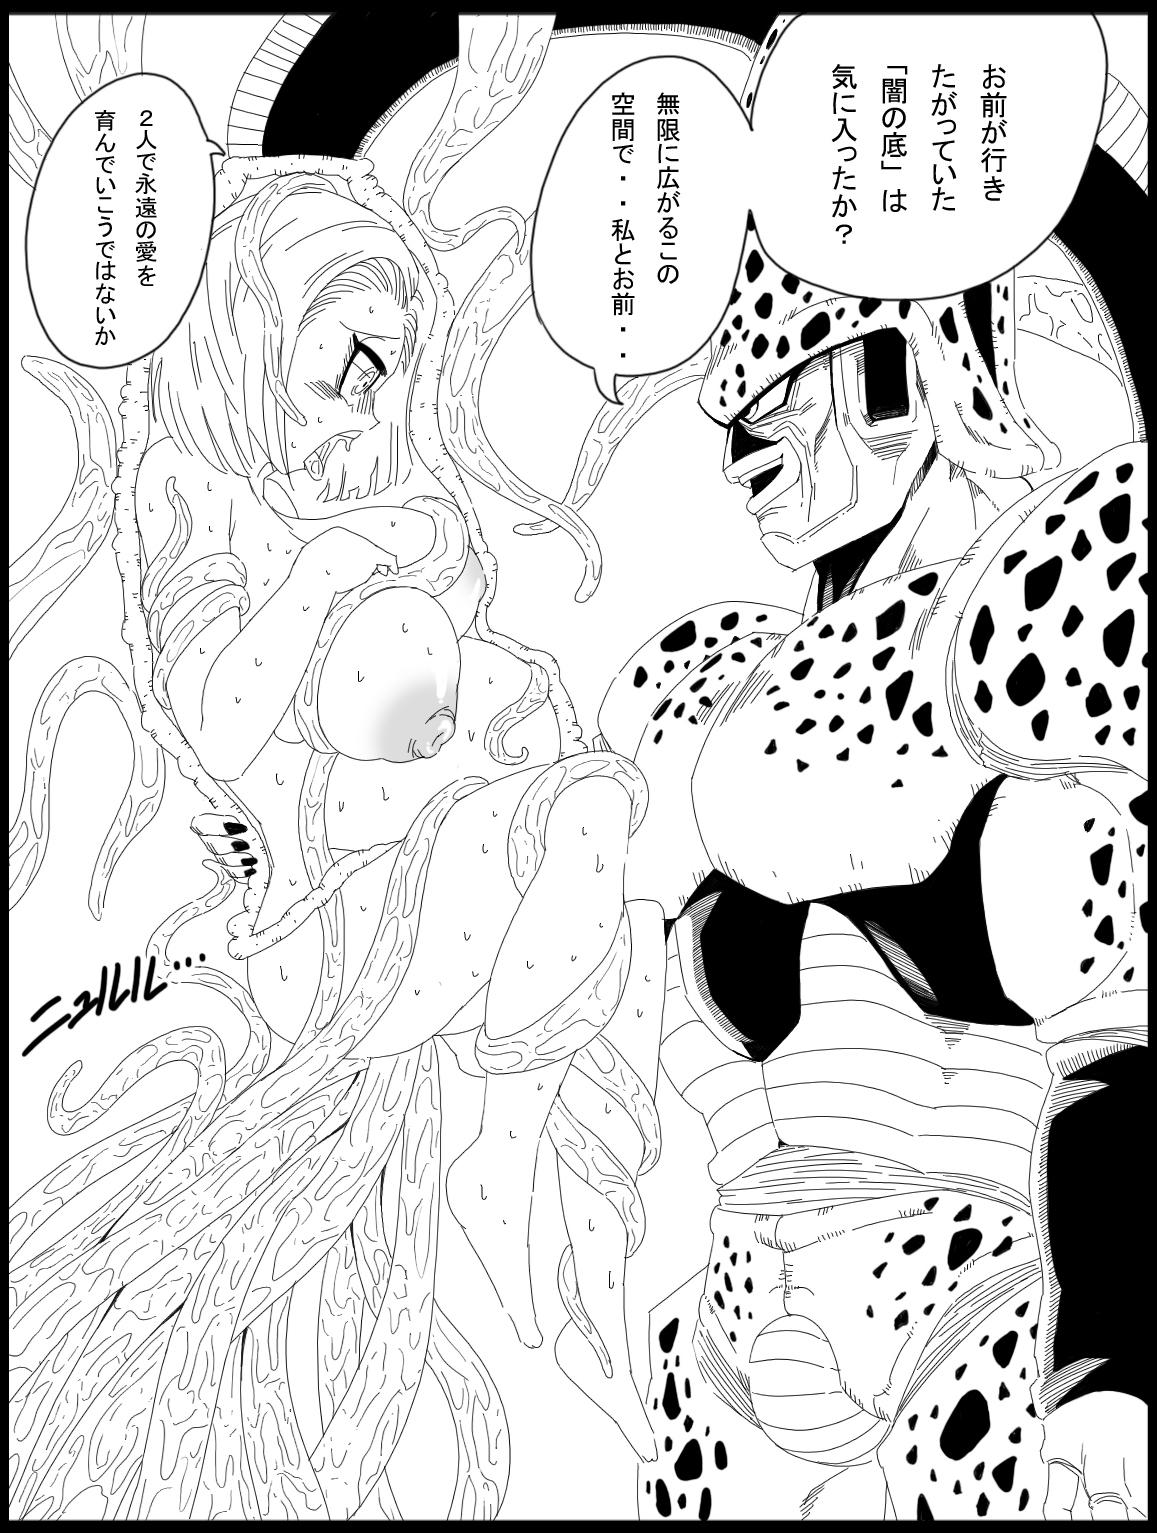 Rough Fuck Dragon Road 14 - Dragon ball z Married - Page 11